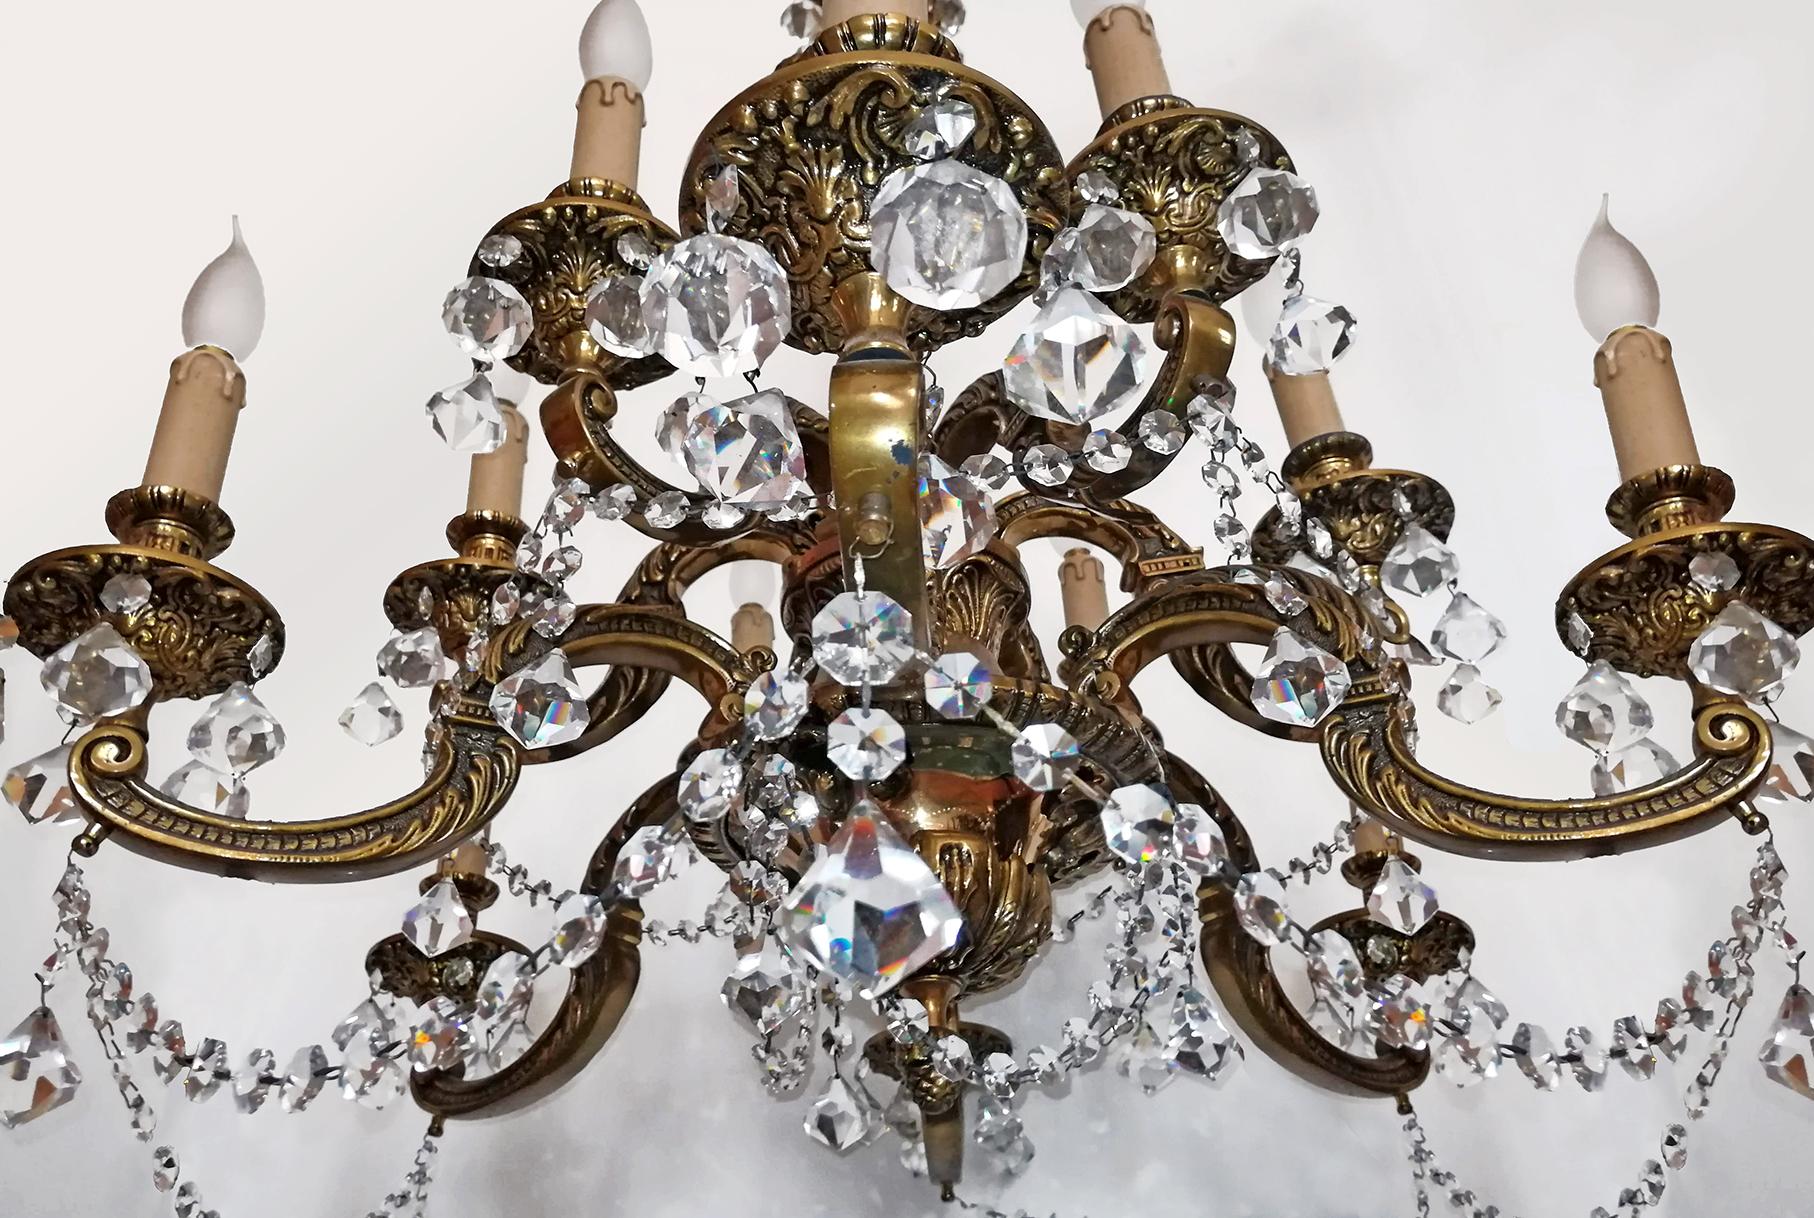 Massive Baroque 12-light gilt bronze chandelier. The scrolled arms have foliate embellishment pincered to a gadrooned central knop. Adorned with foliate baluster stem above and fruiting drop-finial below.

Measures:
Diameter 40 in/ 100 cm
Height